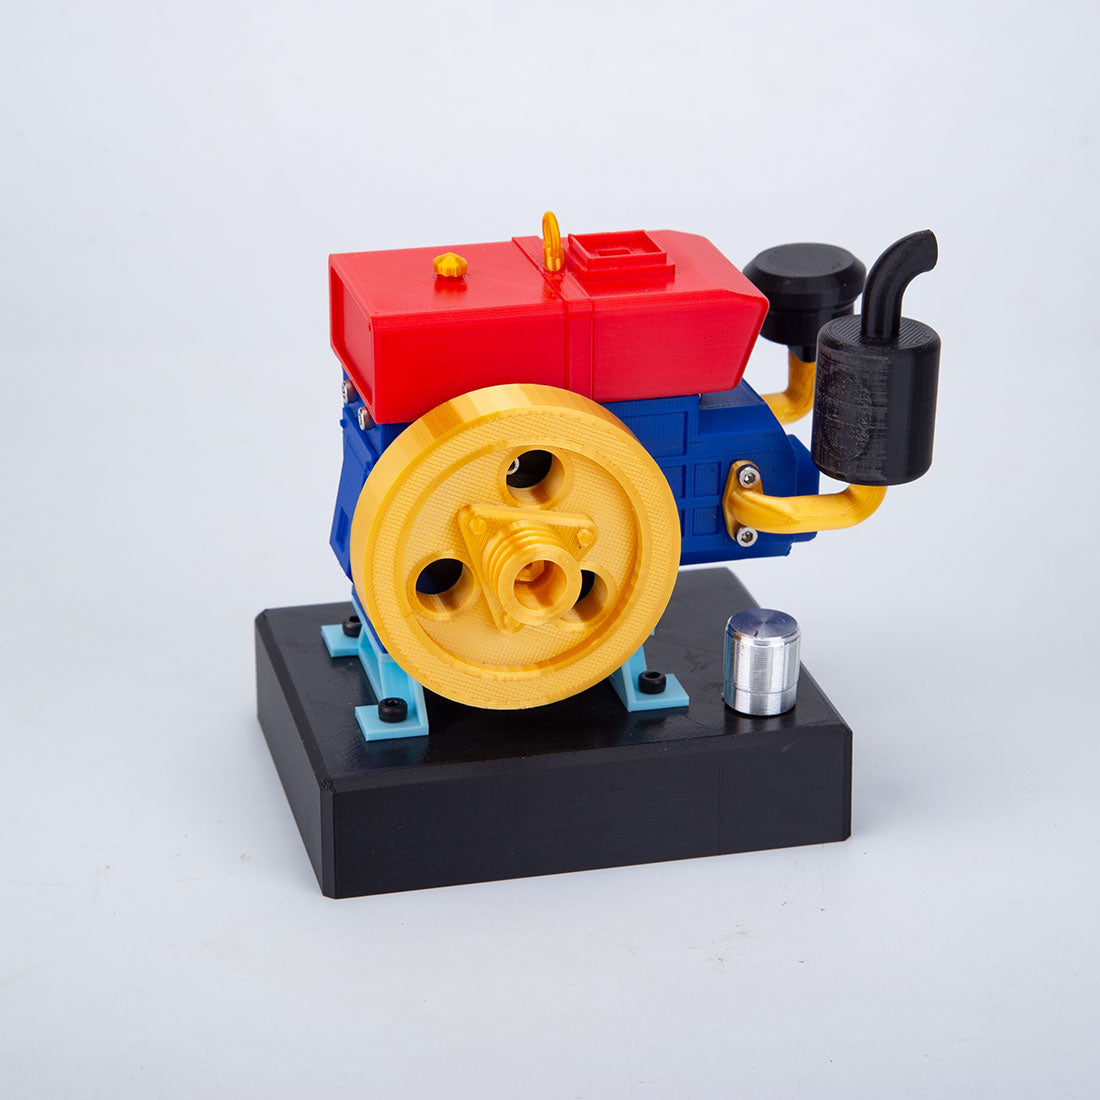 Must See! These Tiny 3D-Printed Engines Are Stunning Motor Masterpieces